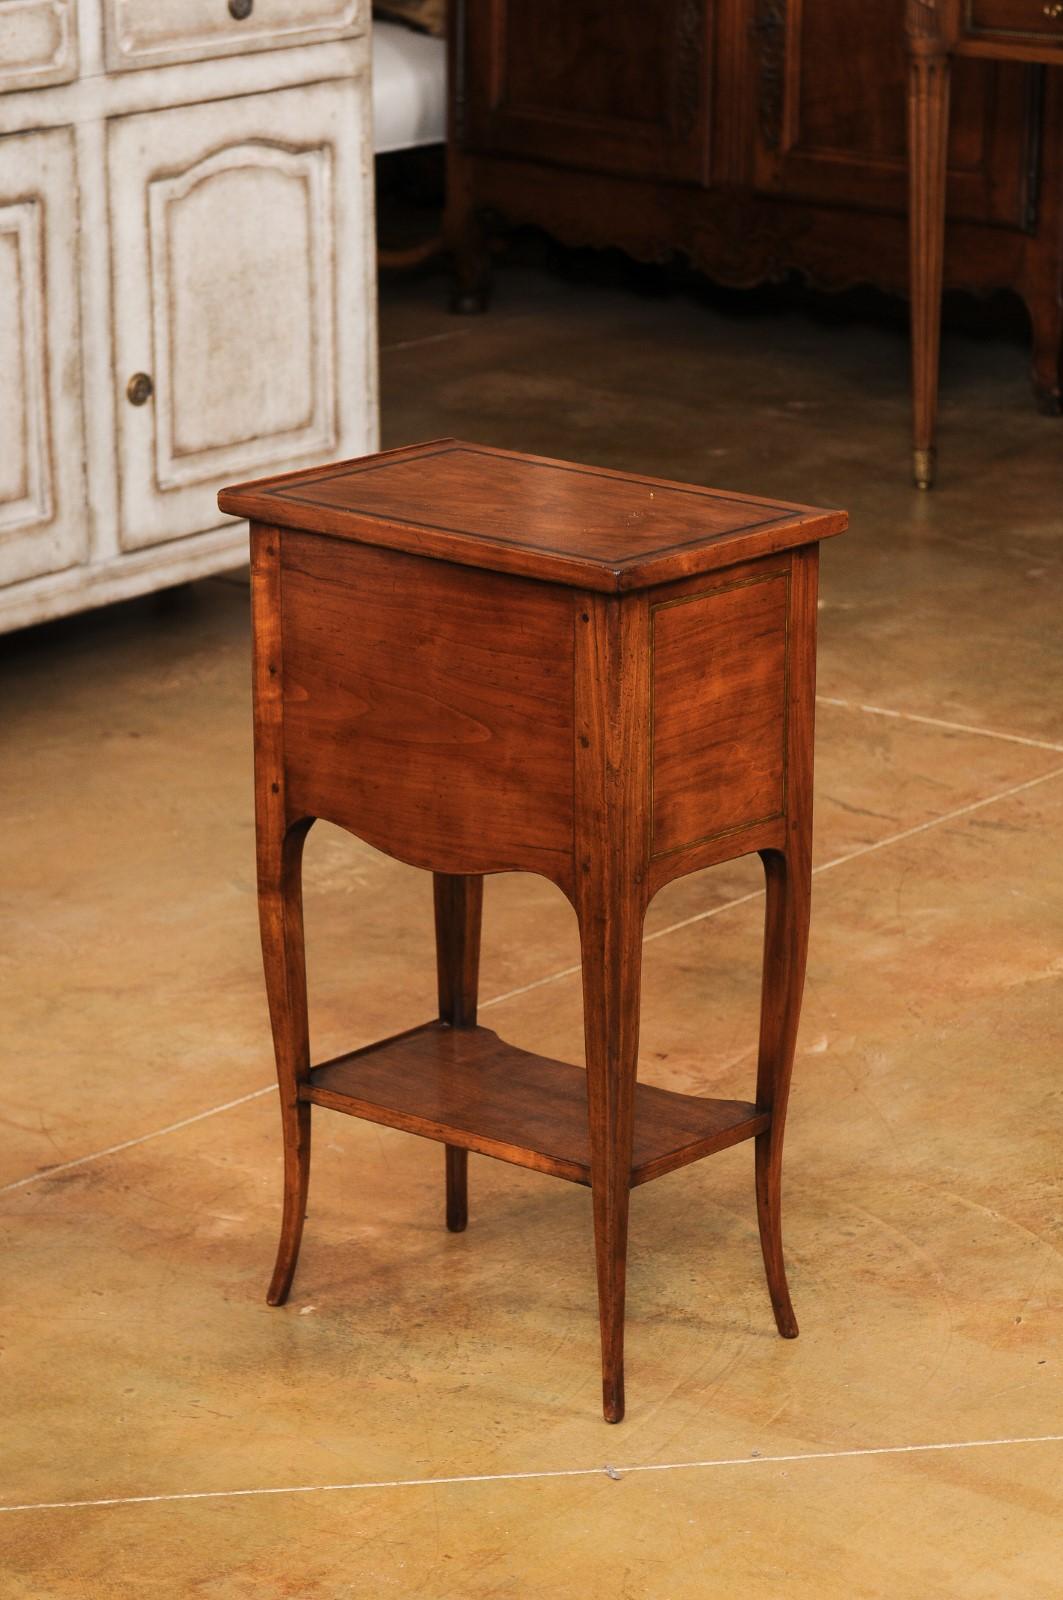 A French Louis XV style cherry wood table-chiffonnière from the 20th century with three small drawers and lower shelf. Created in France during the 20th century, this cherry wood side table, called a table-chiffonnière in French, was designed to be